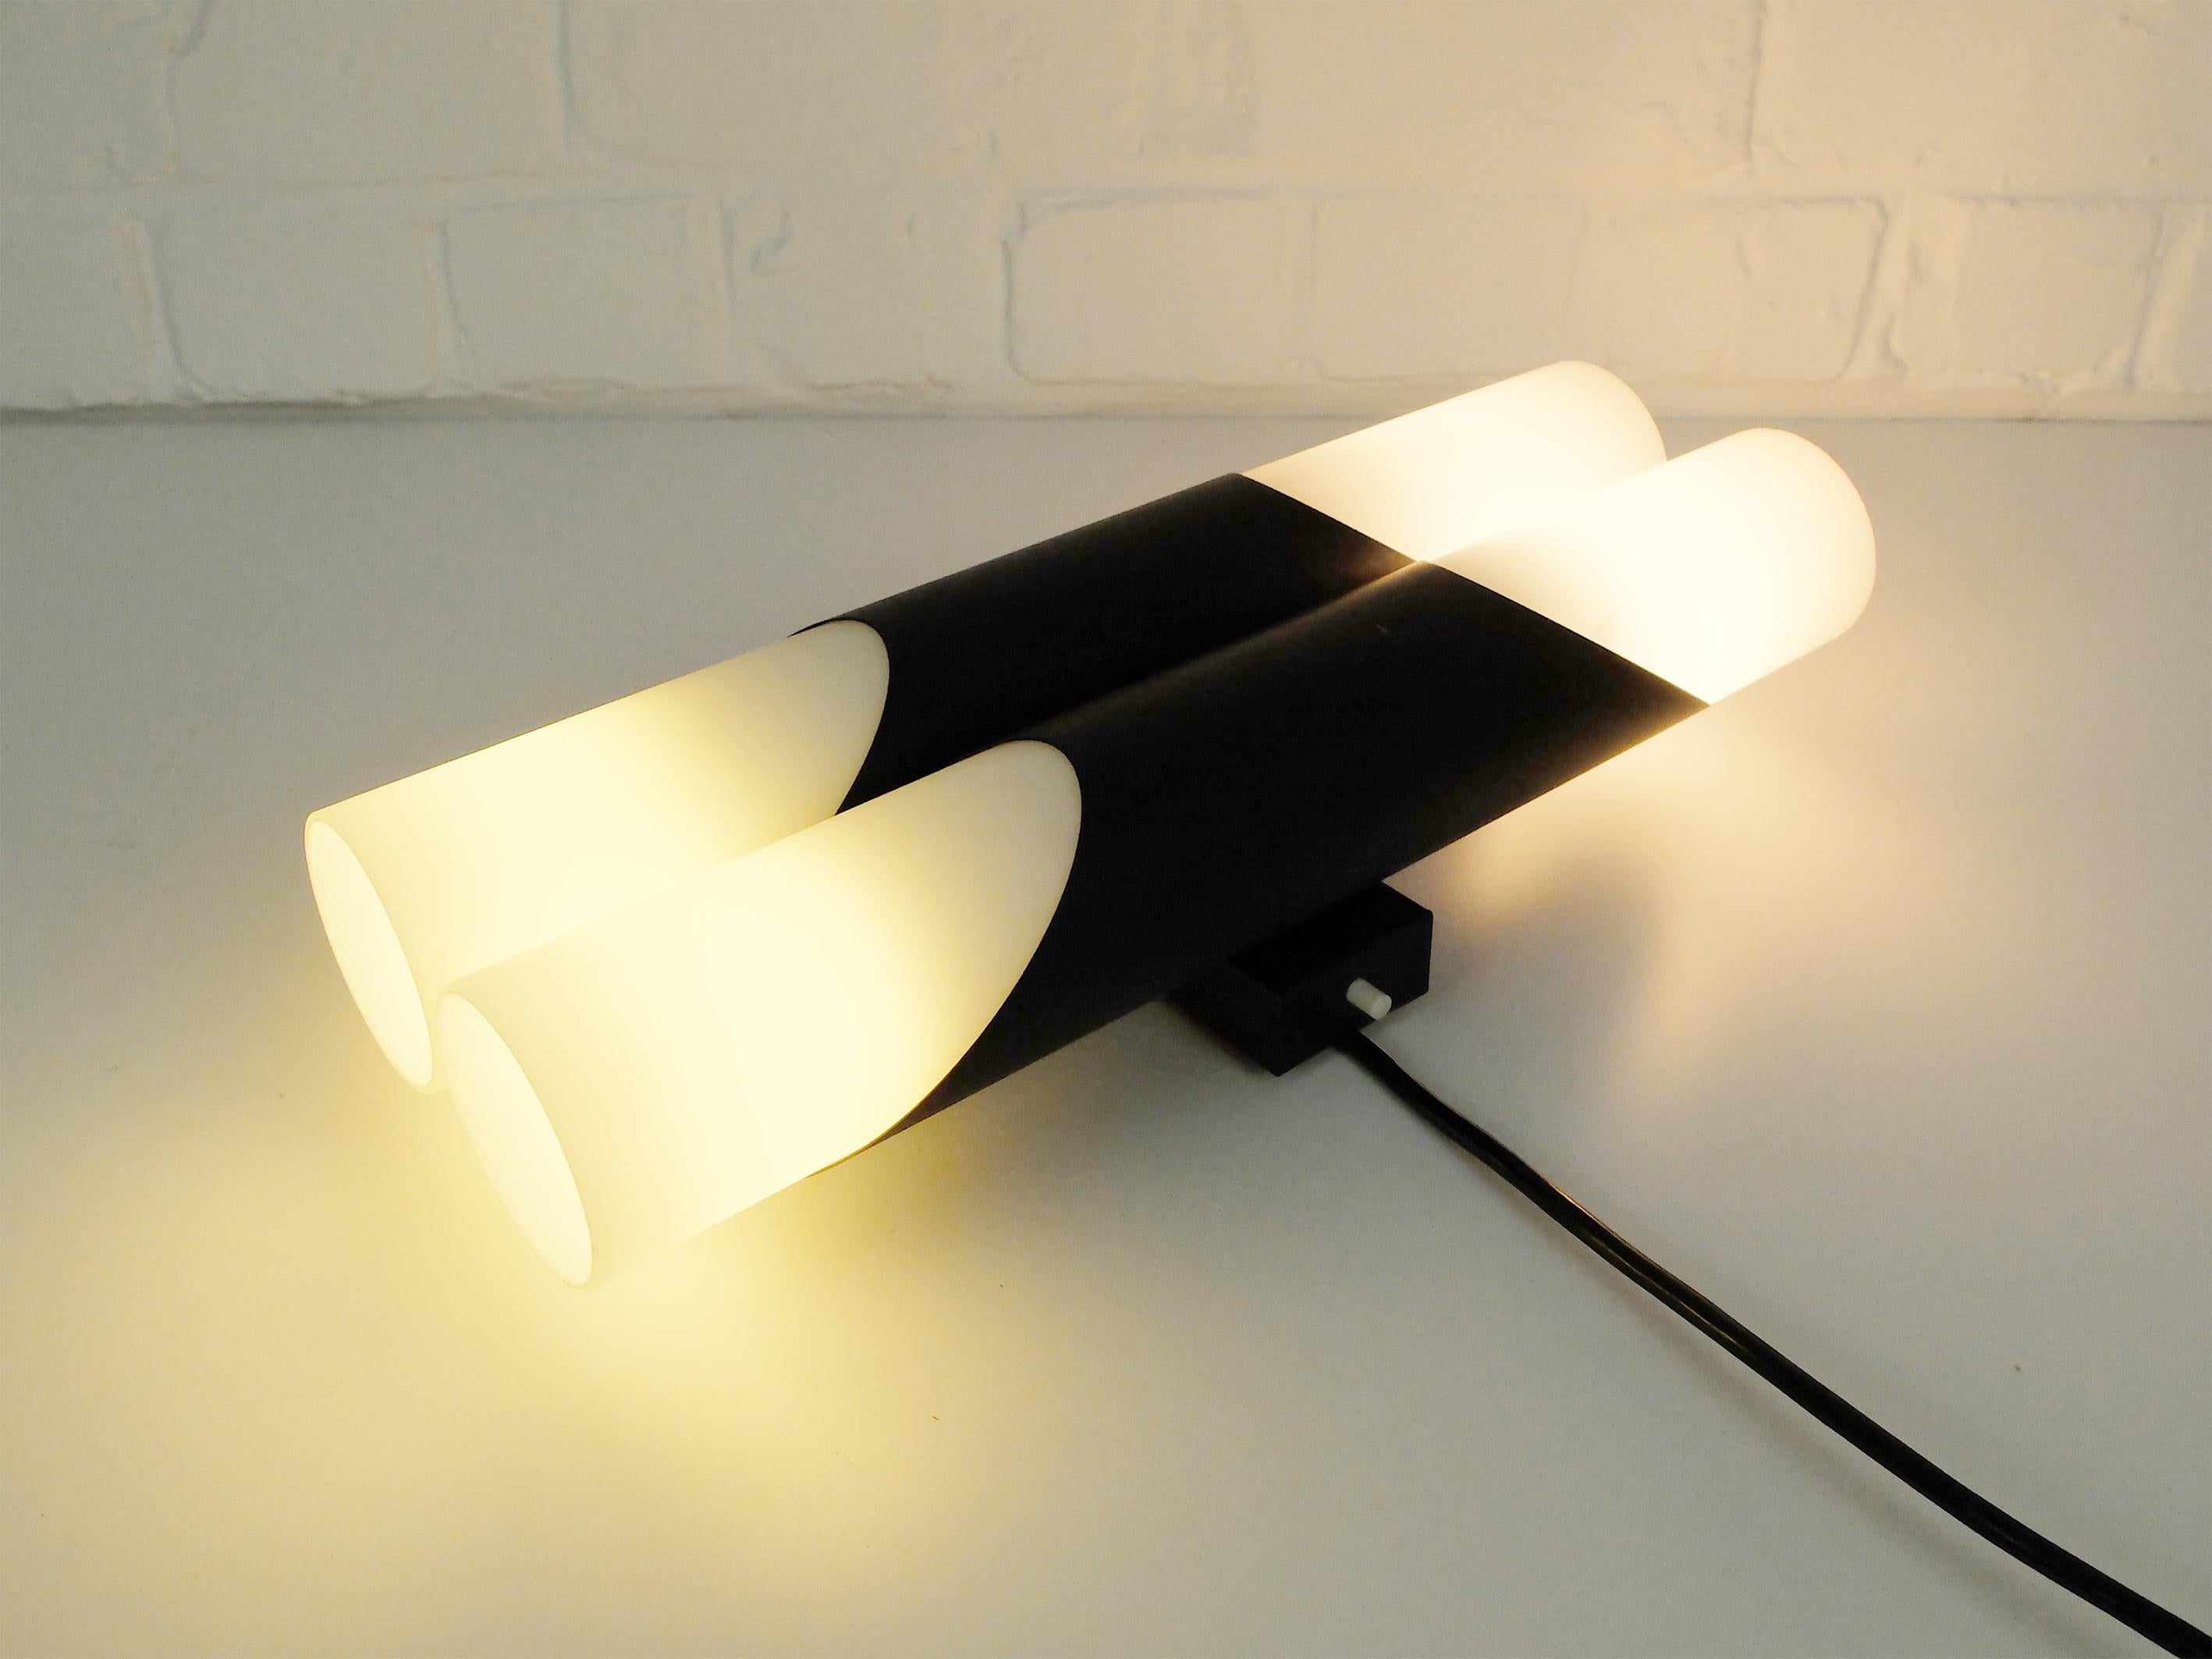 20th Century Double Glass Wall Light in black by Rolf Krüger for Paul Neuhaus, Germany 1970 For Sale